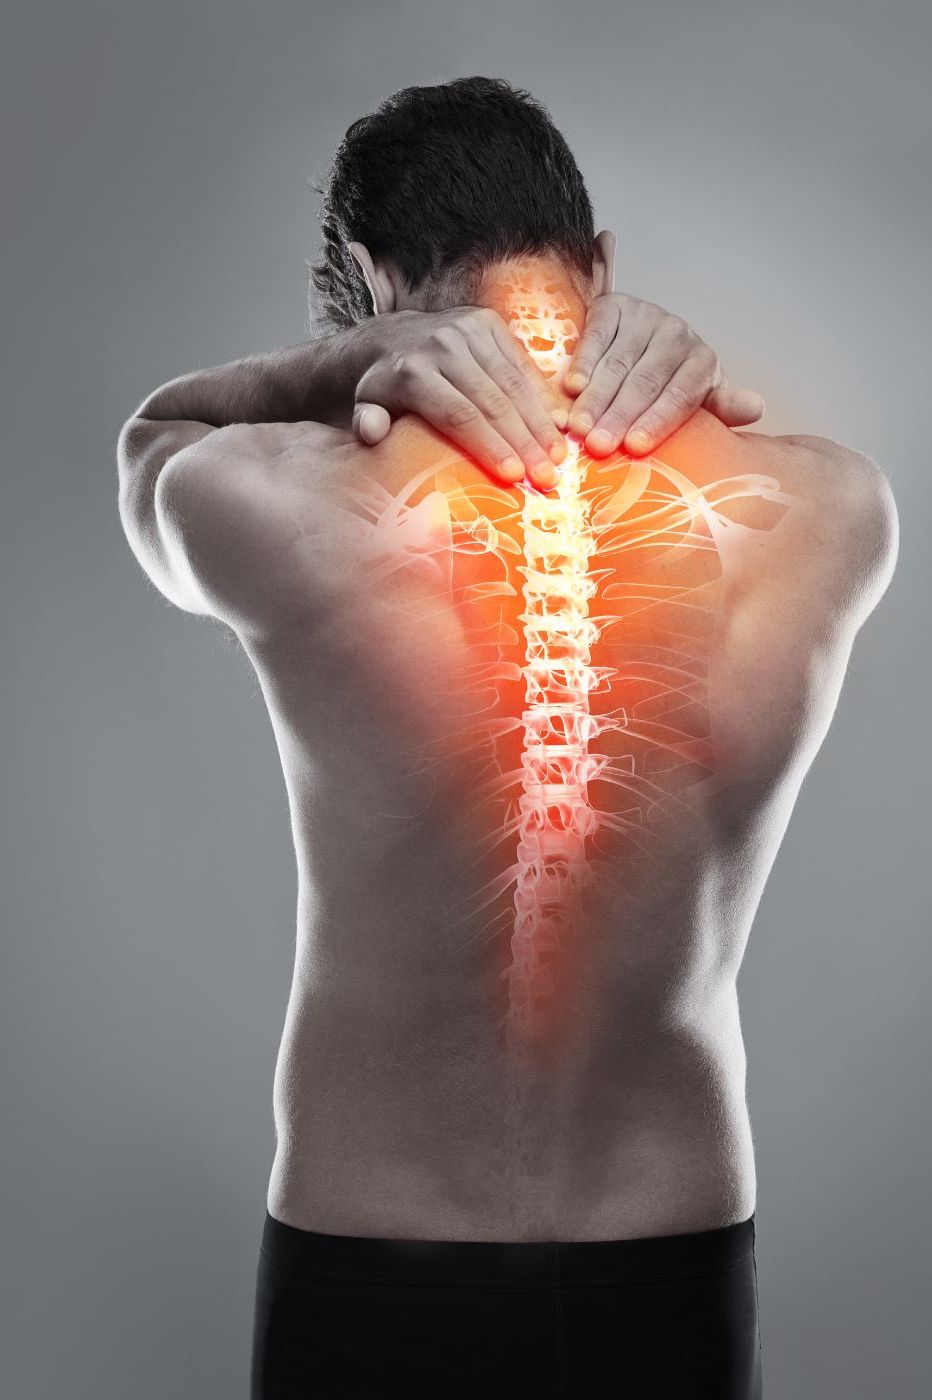 A man seen from the back, holding his neck, with a glowing visual of his spine highlighting potential pain areas in red and orange. He appears to have back issues or discomfort.